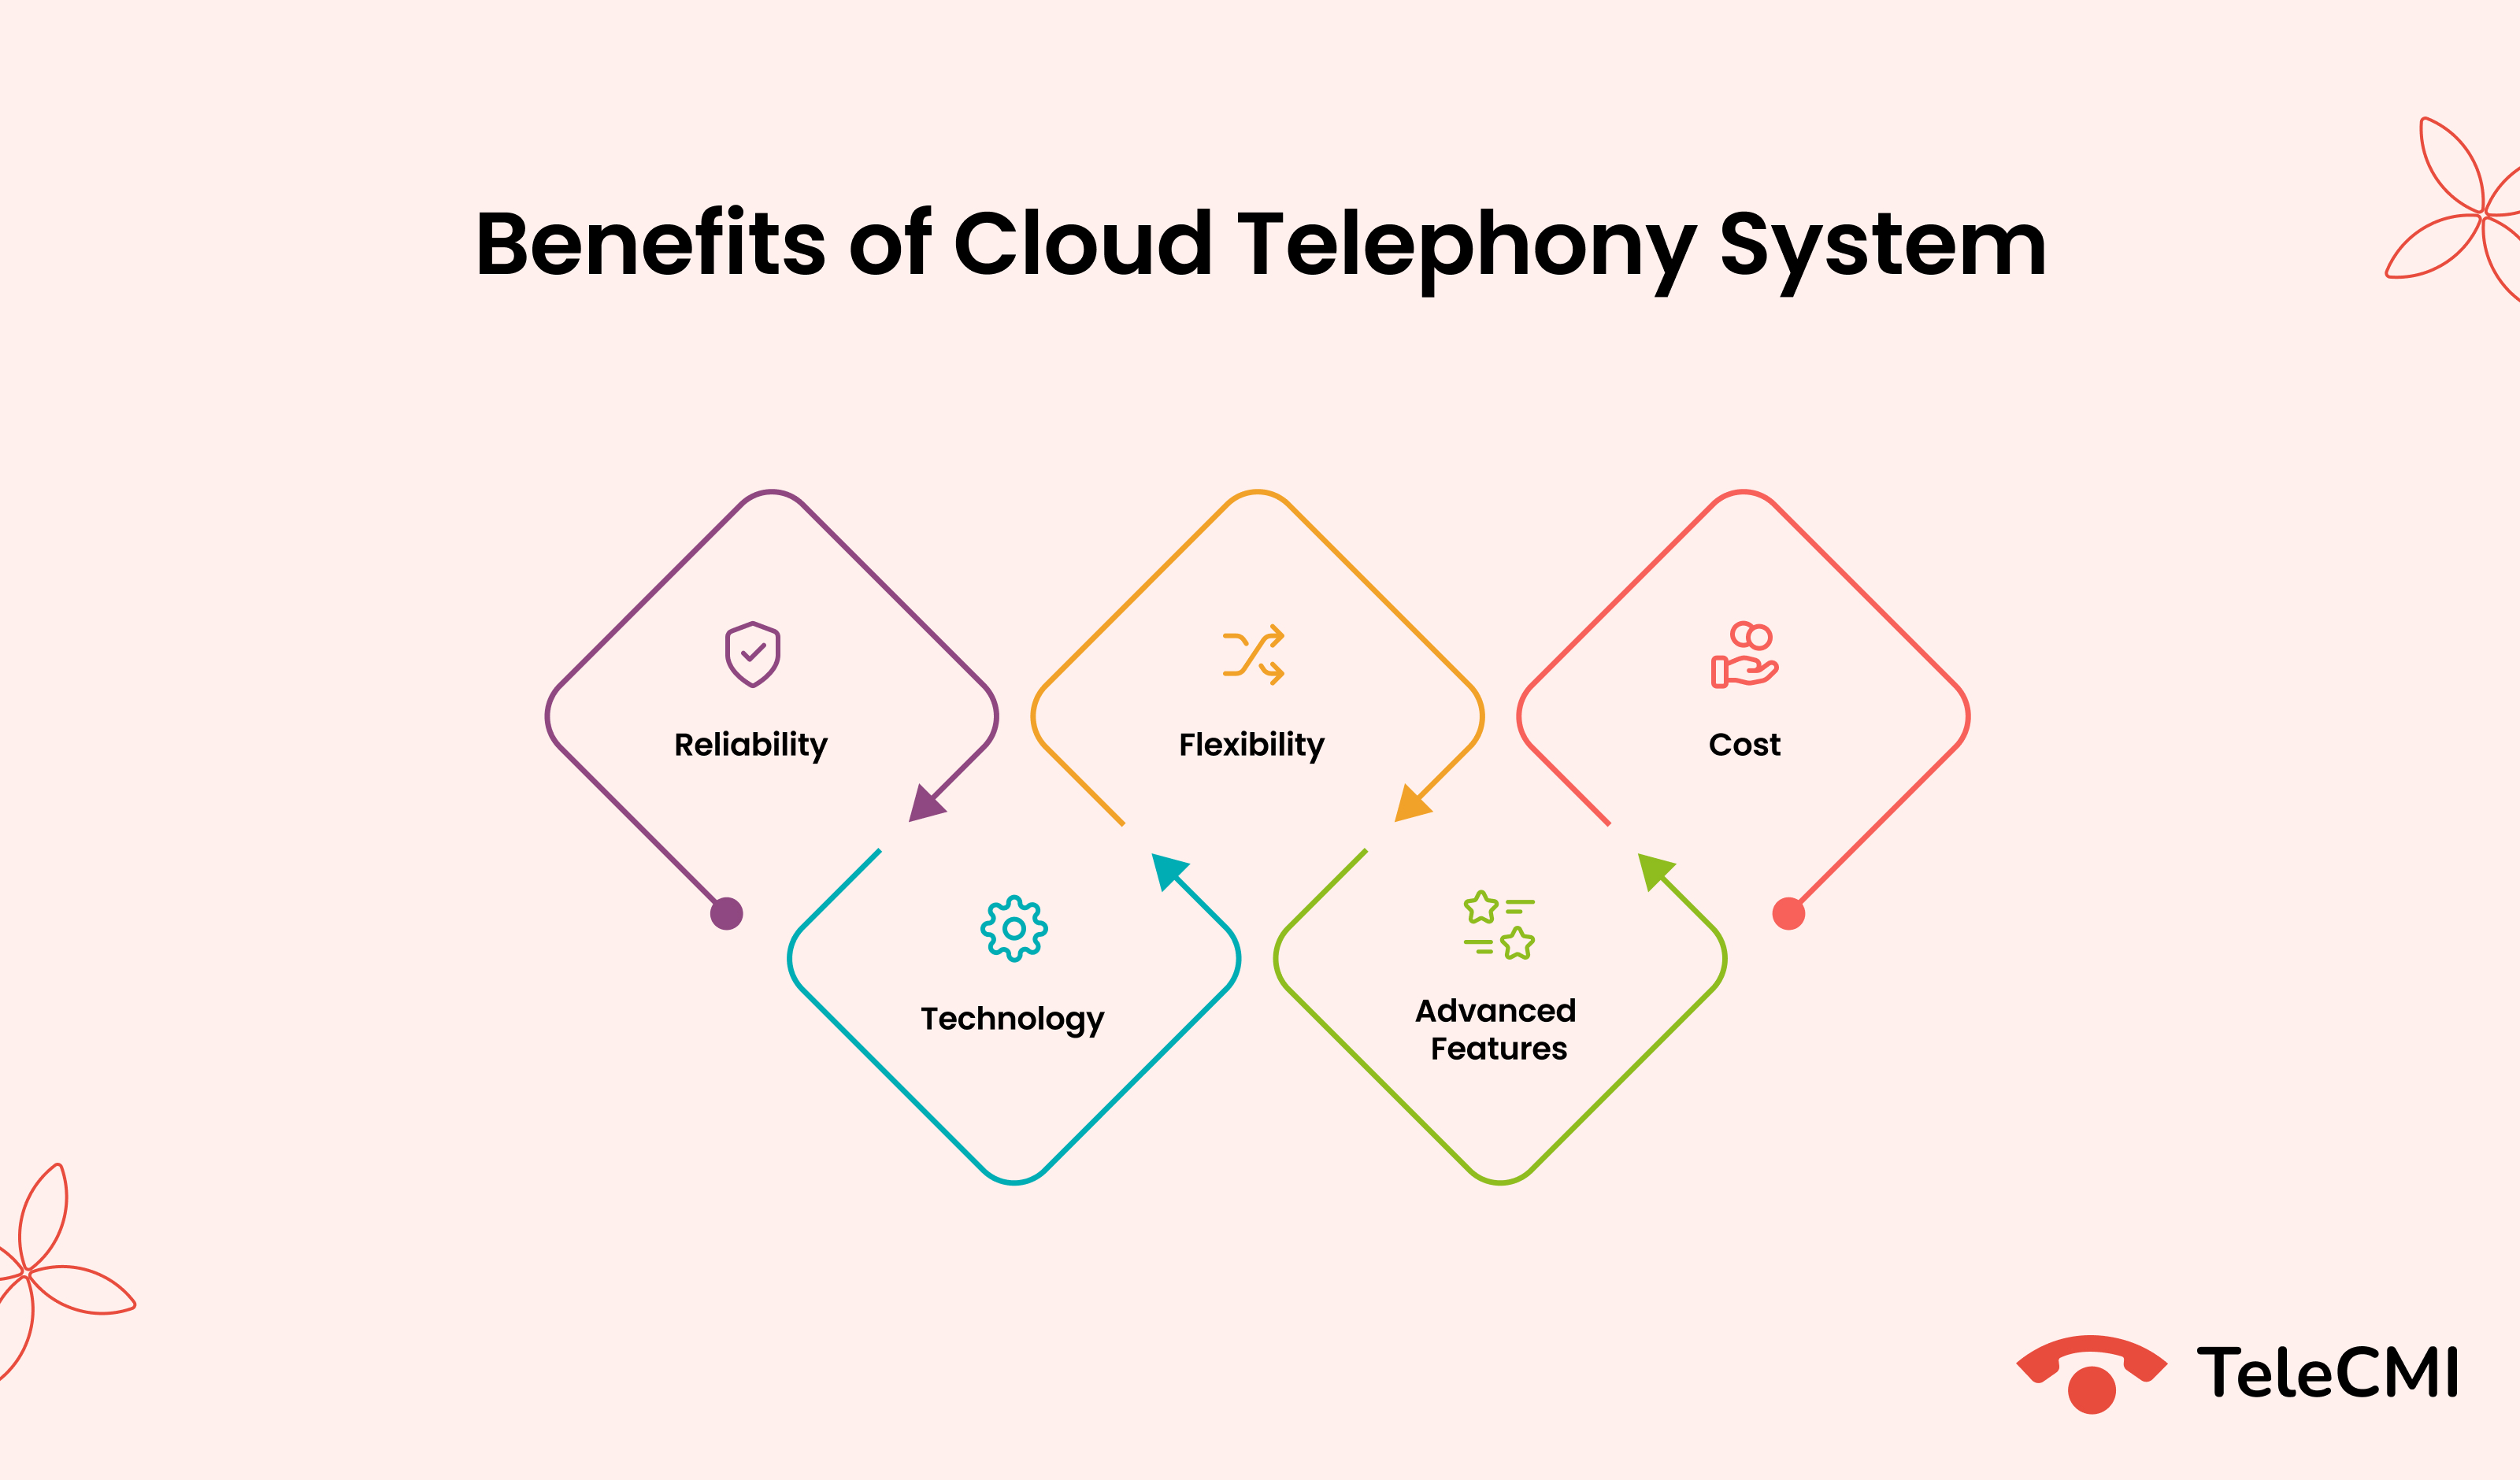 Here are the significant differences between Cloud Telephony and VoIP